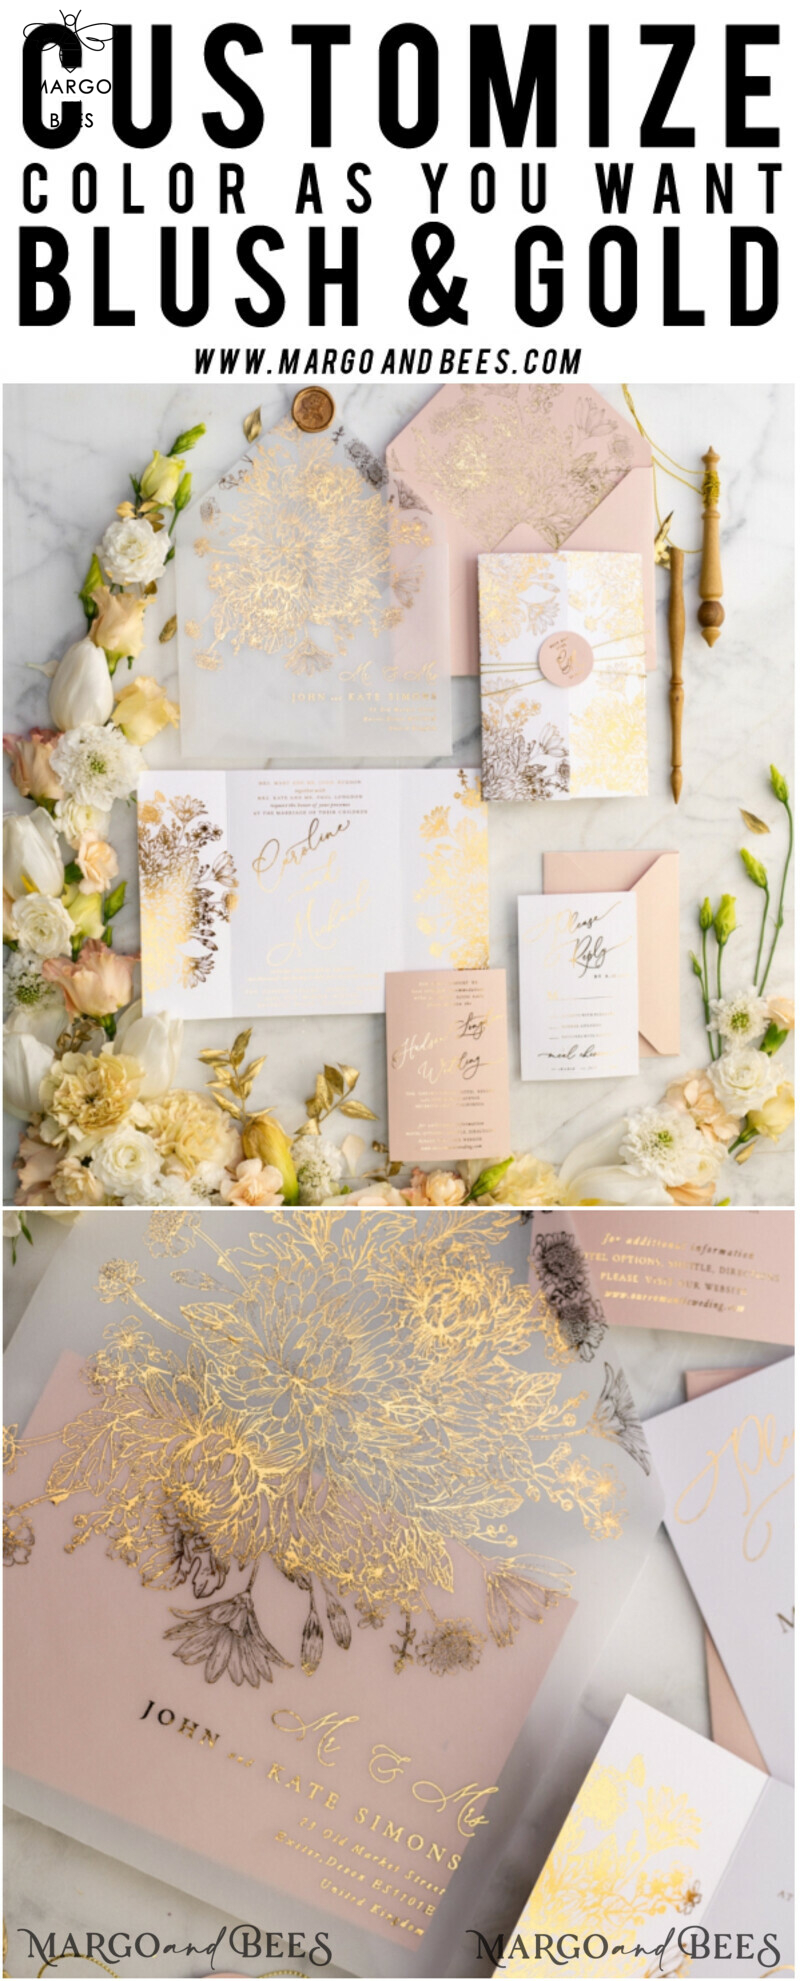 Exquisite Arabic Golden Wedding Invitations with Glamour Gold Foil and Romantic Blush Pink Touches: Bespoke Indian Wedding Stationery-46